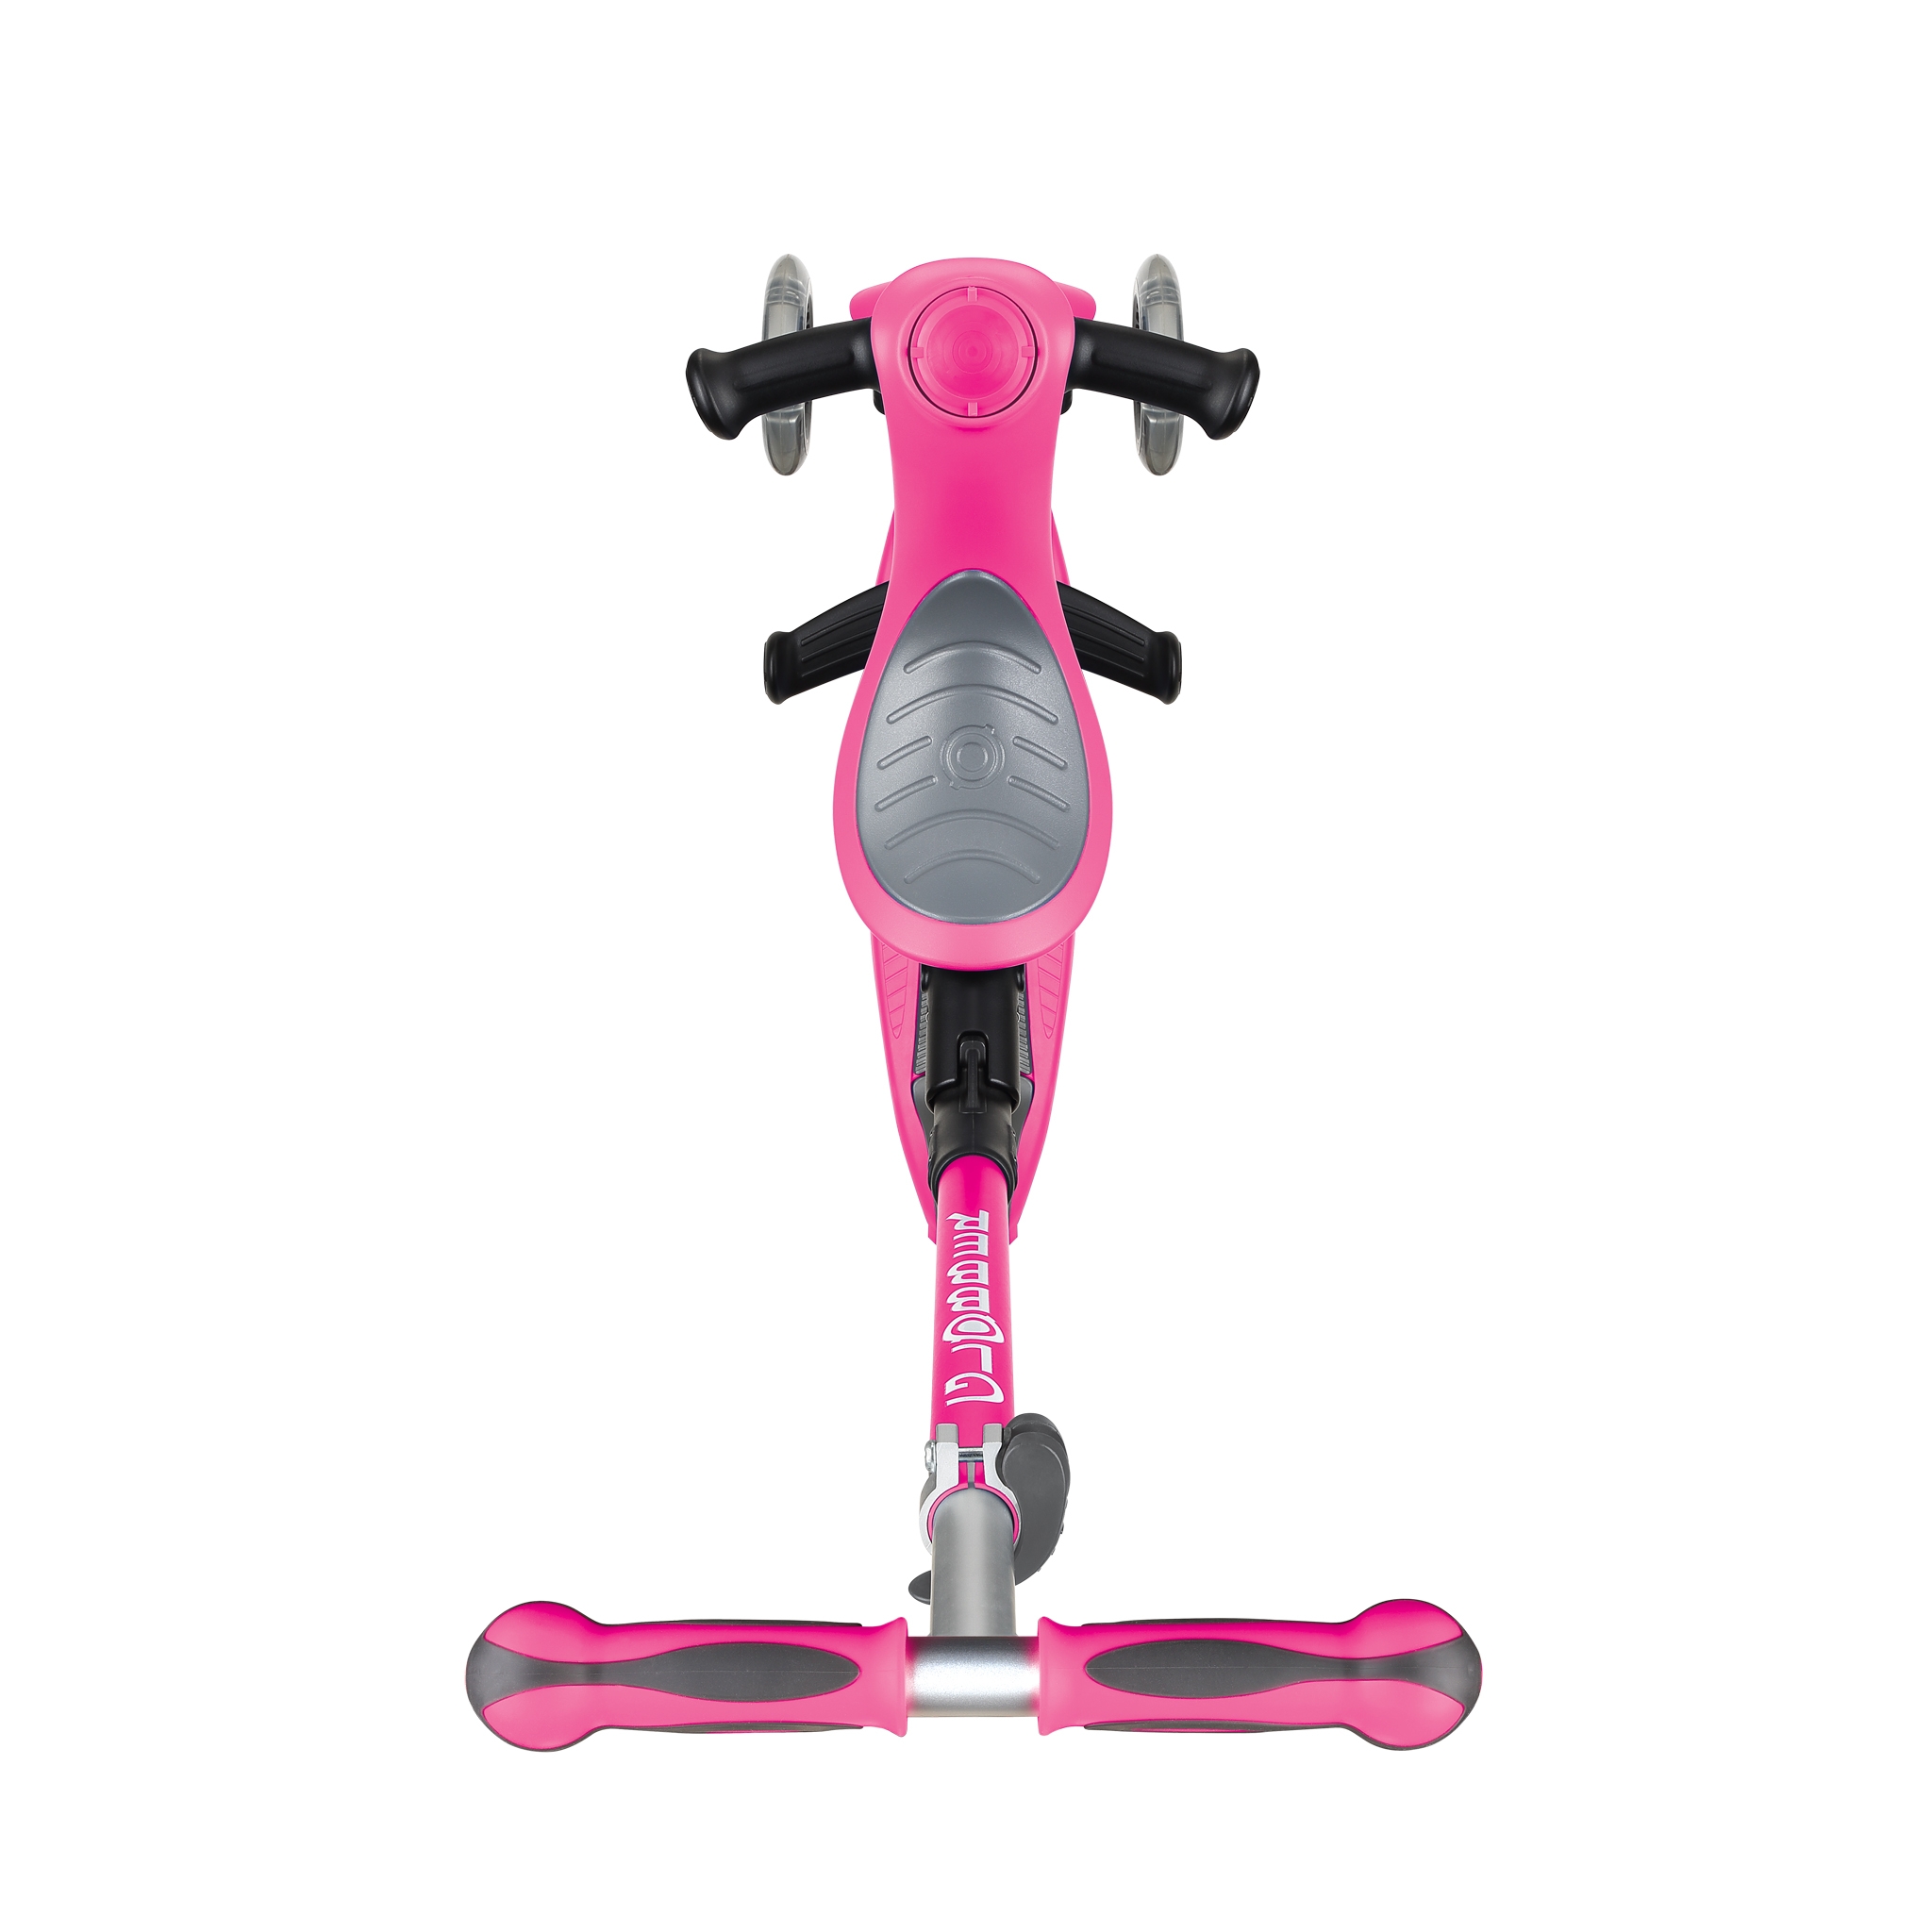 GO-UP-DELUXE-ride-on-walking-bike-scooter-with-extra-wide-3-height-adjustable-seat-deep-pink 2